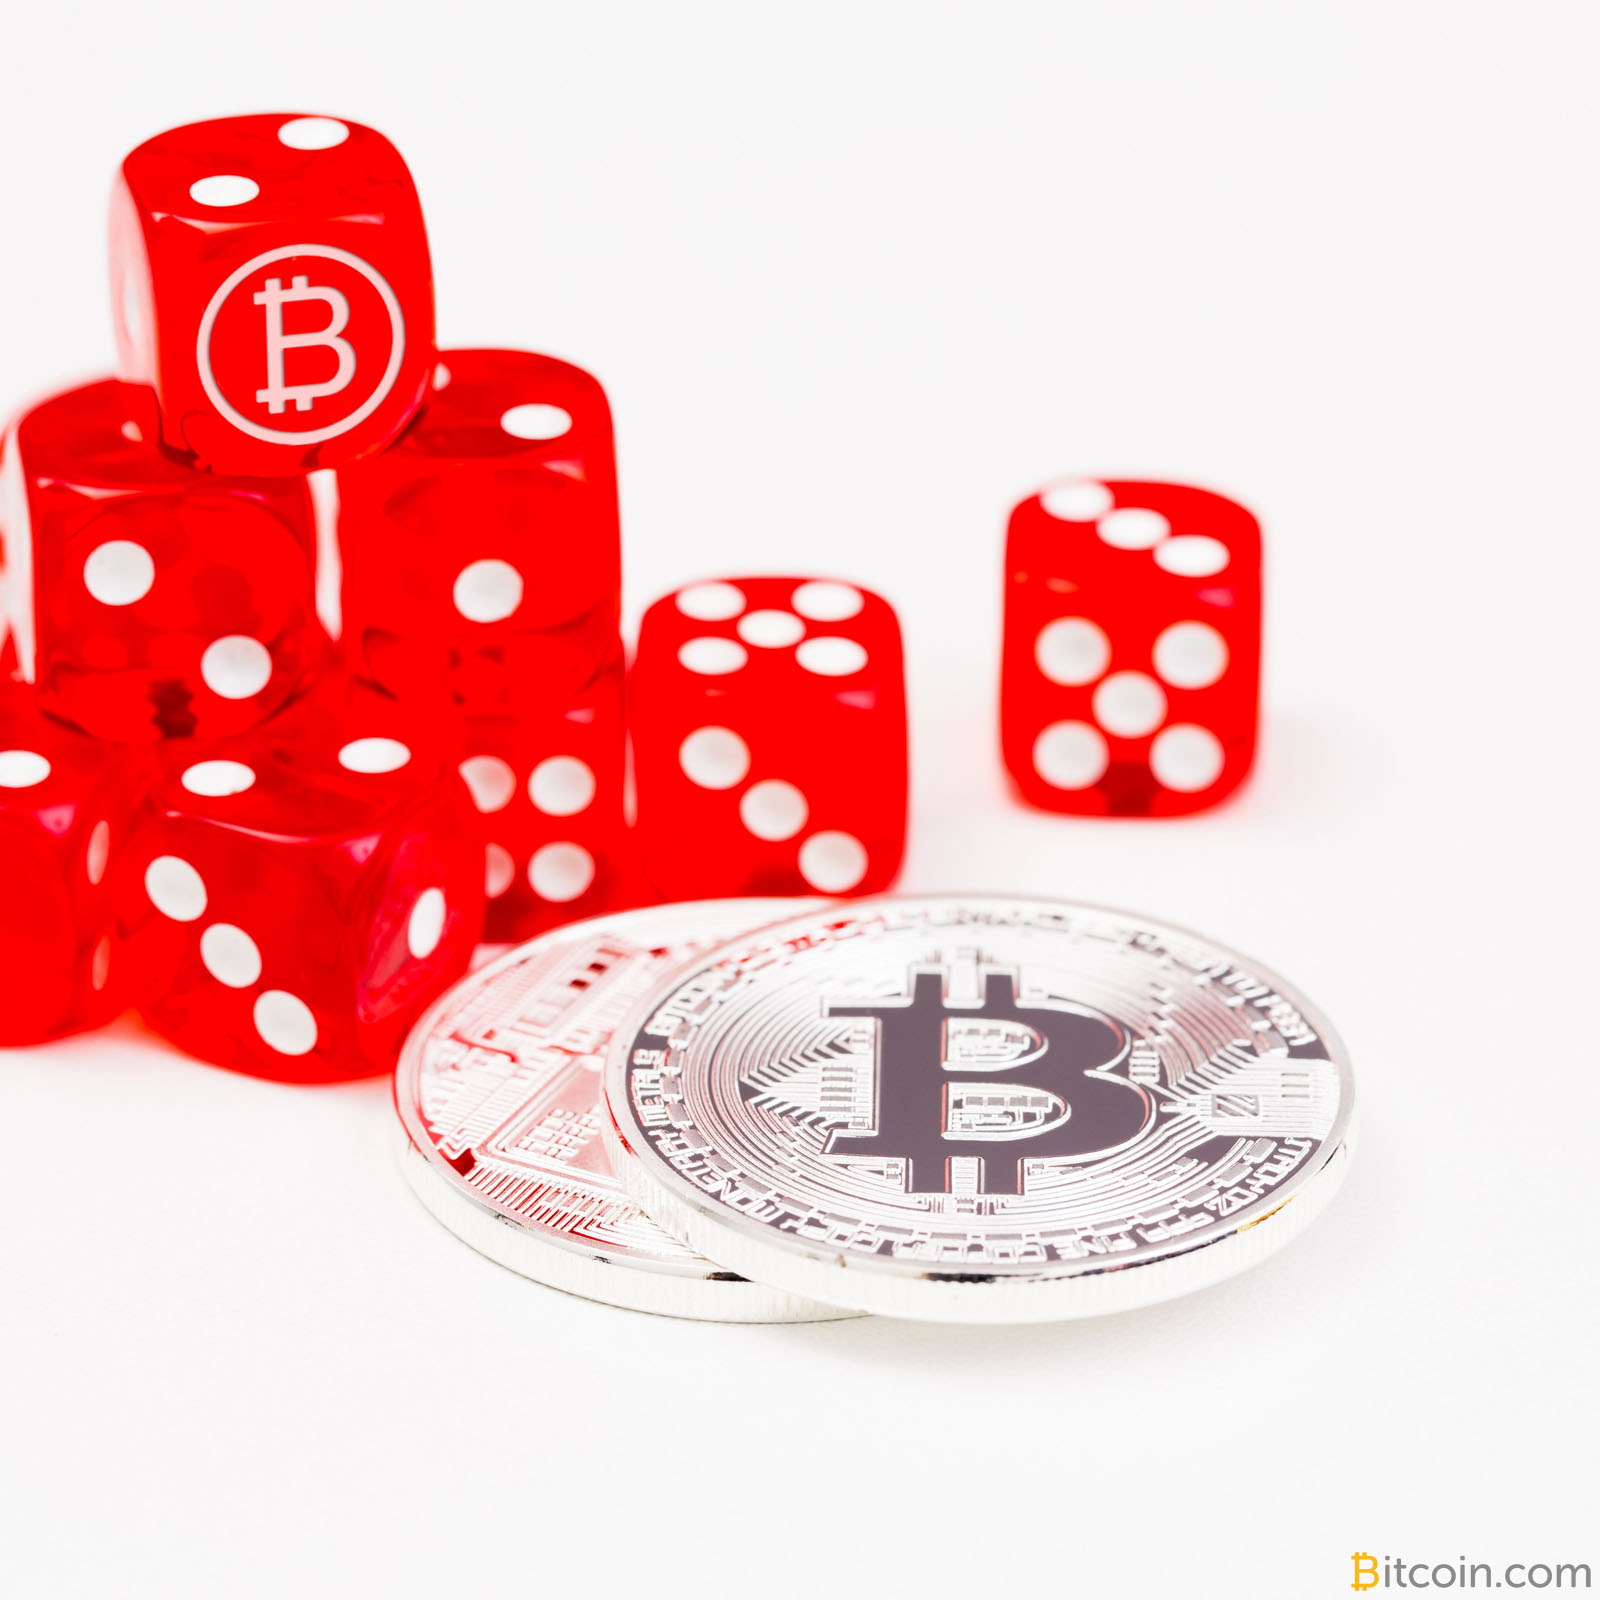 Slotland Online Gaming Site Now Offers Bitcoin Deposits and Withdrawals